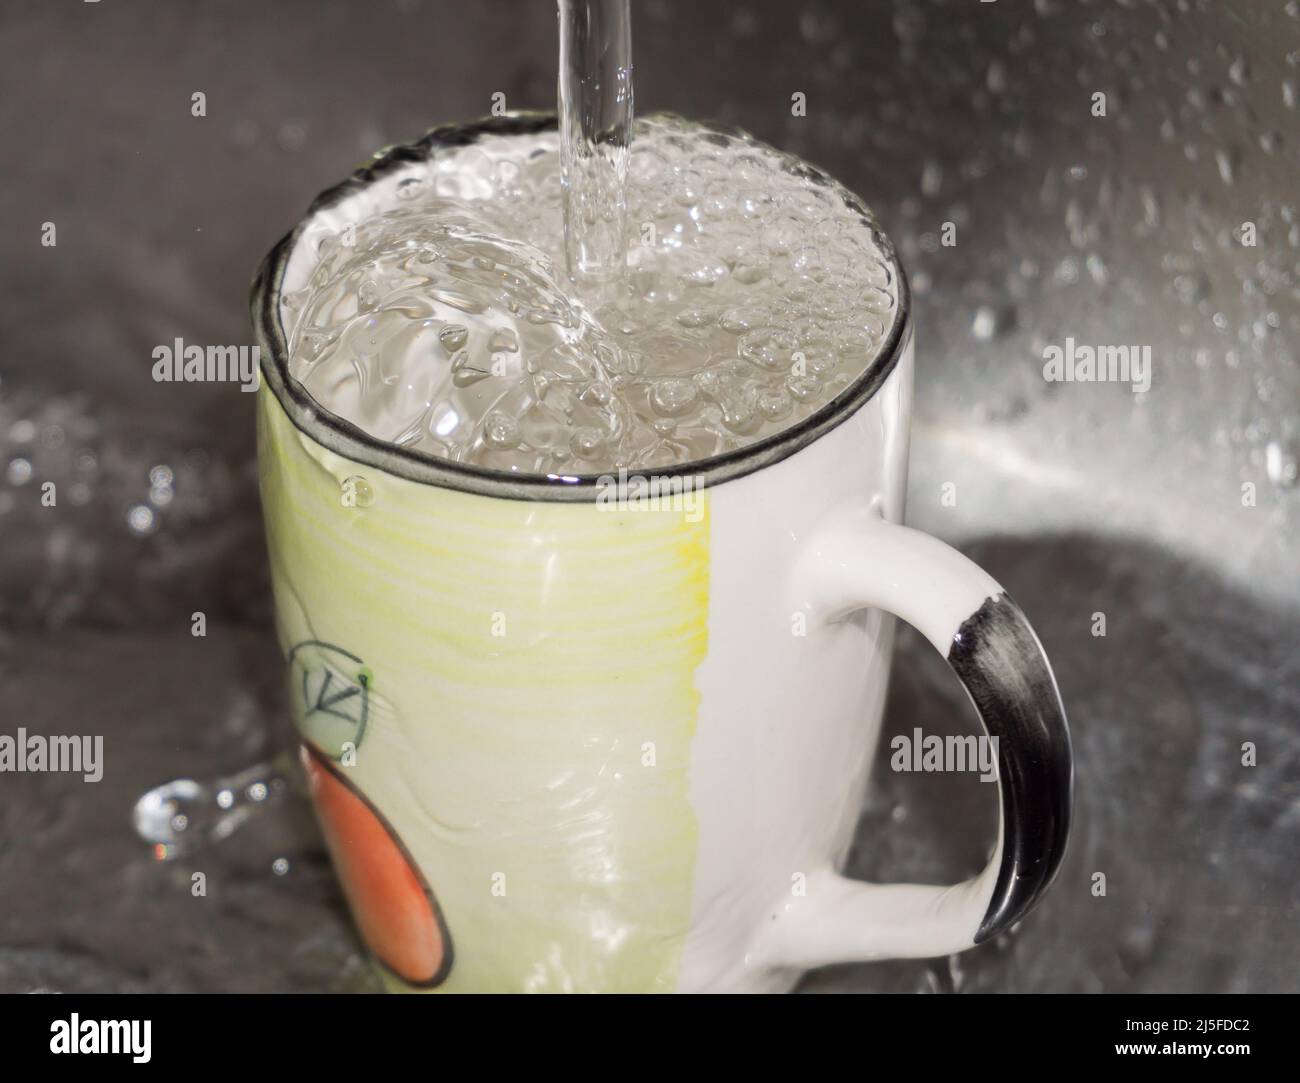 Wasting coming down to a cup, overflowing on the sink Stock Photo